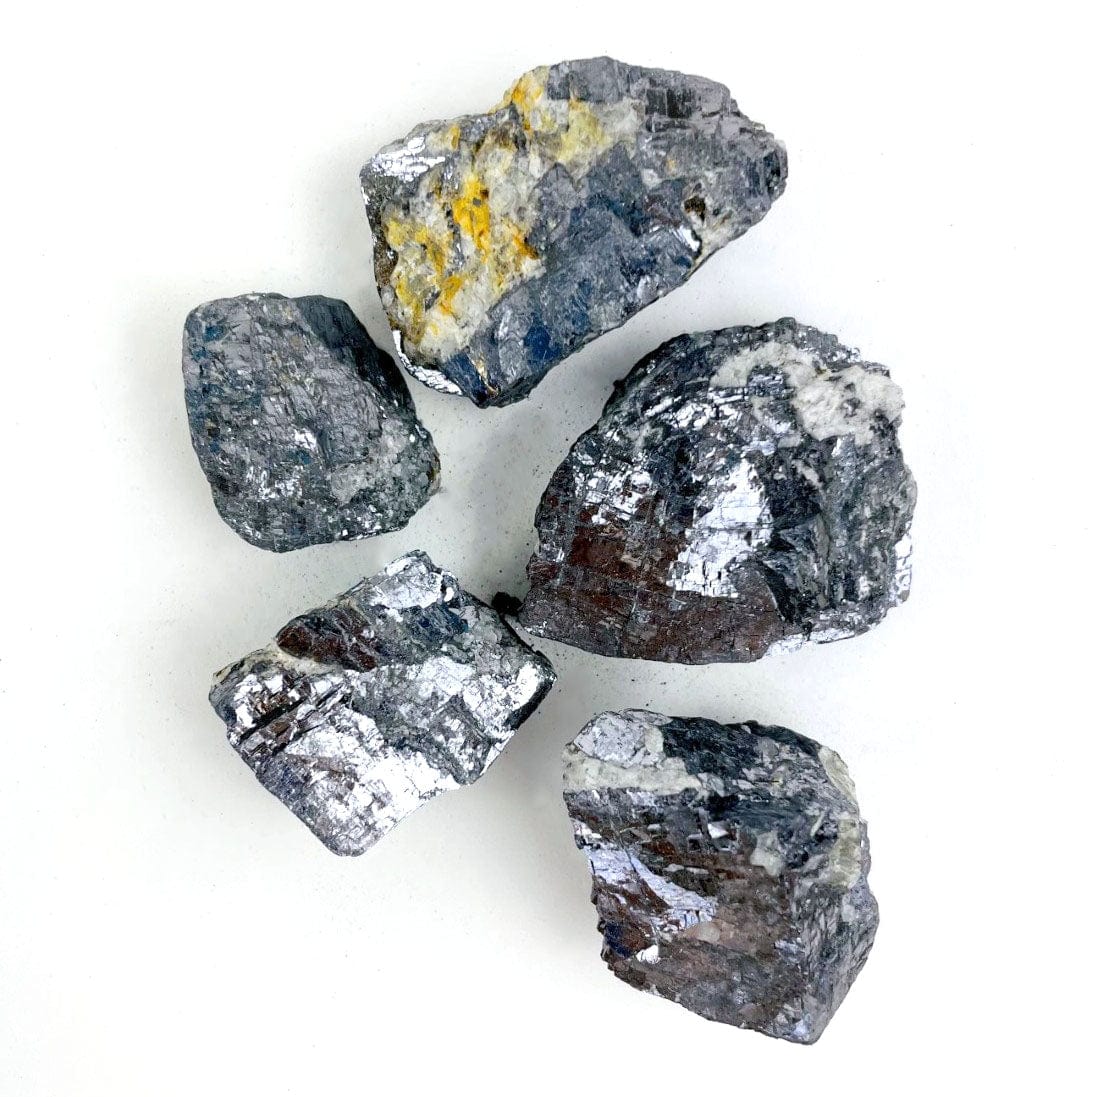 5 galena stones on a white background